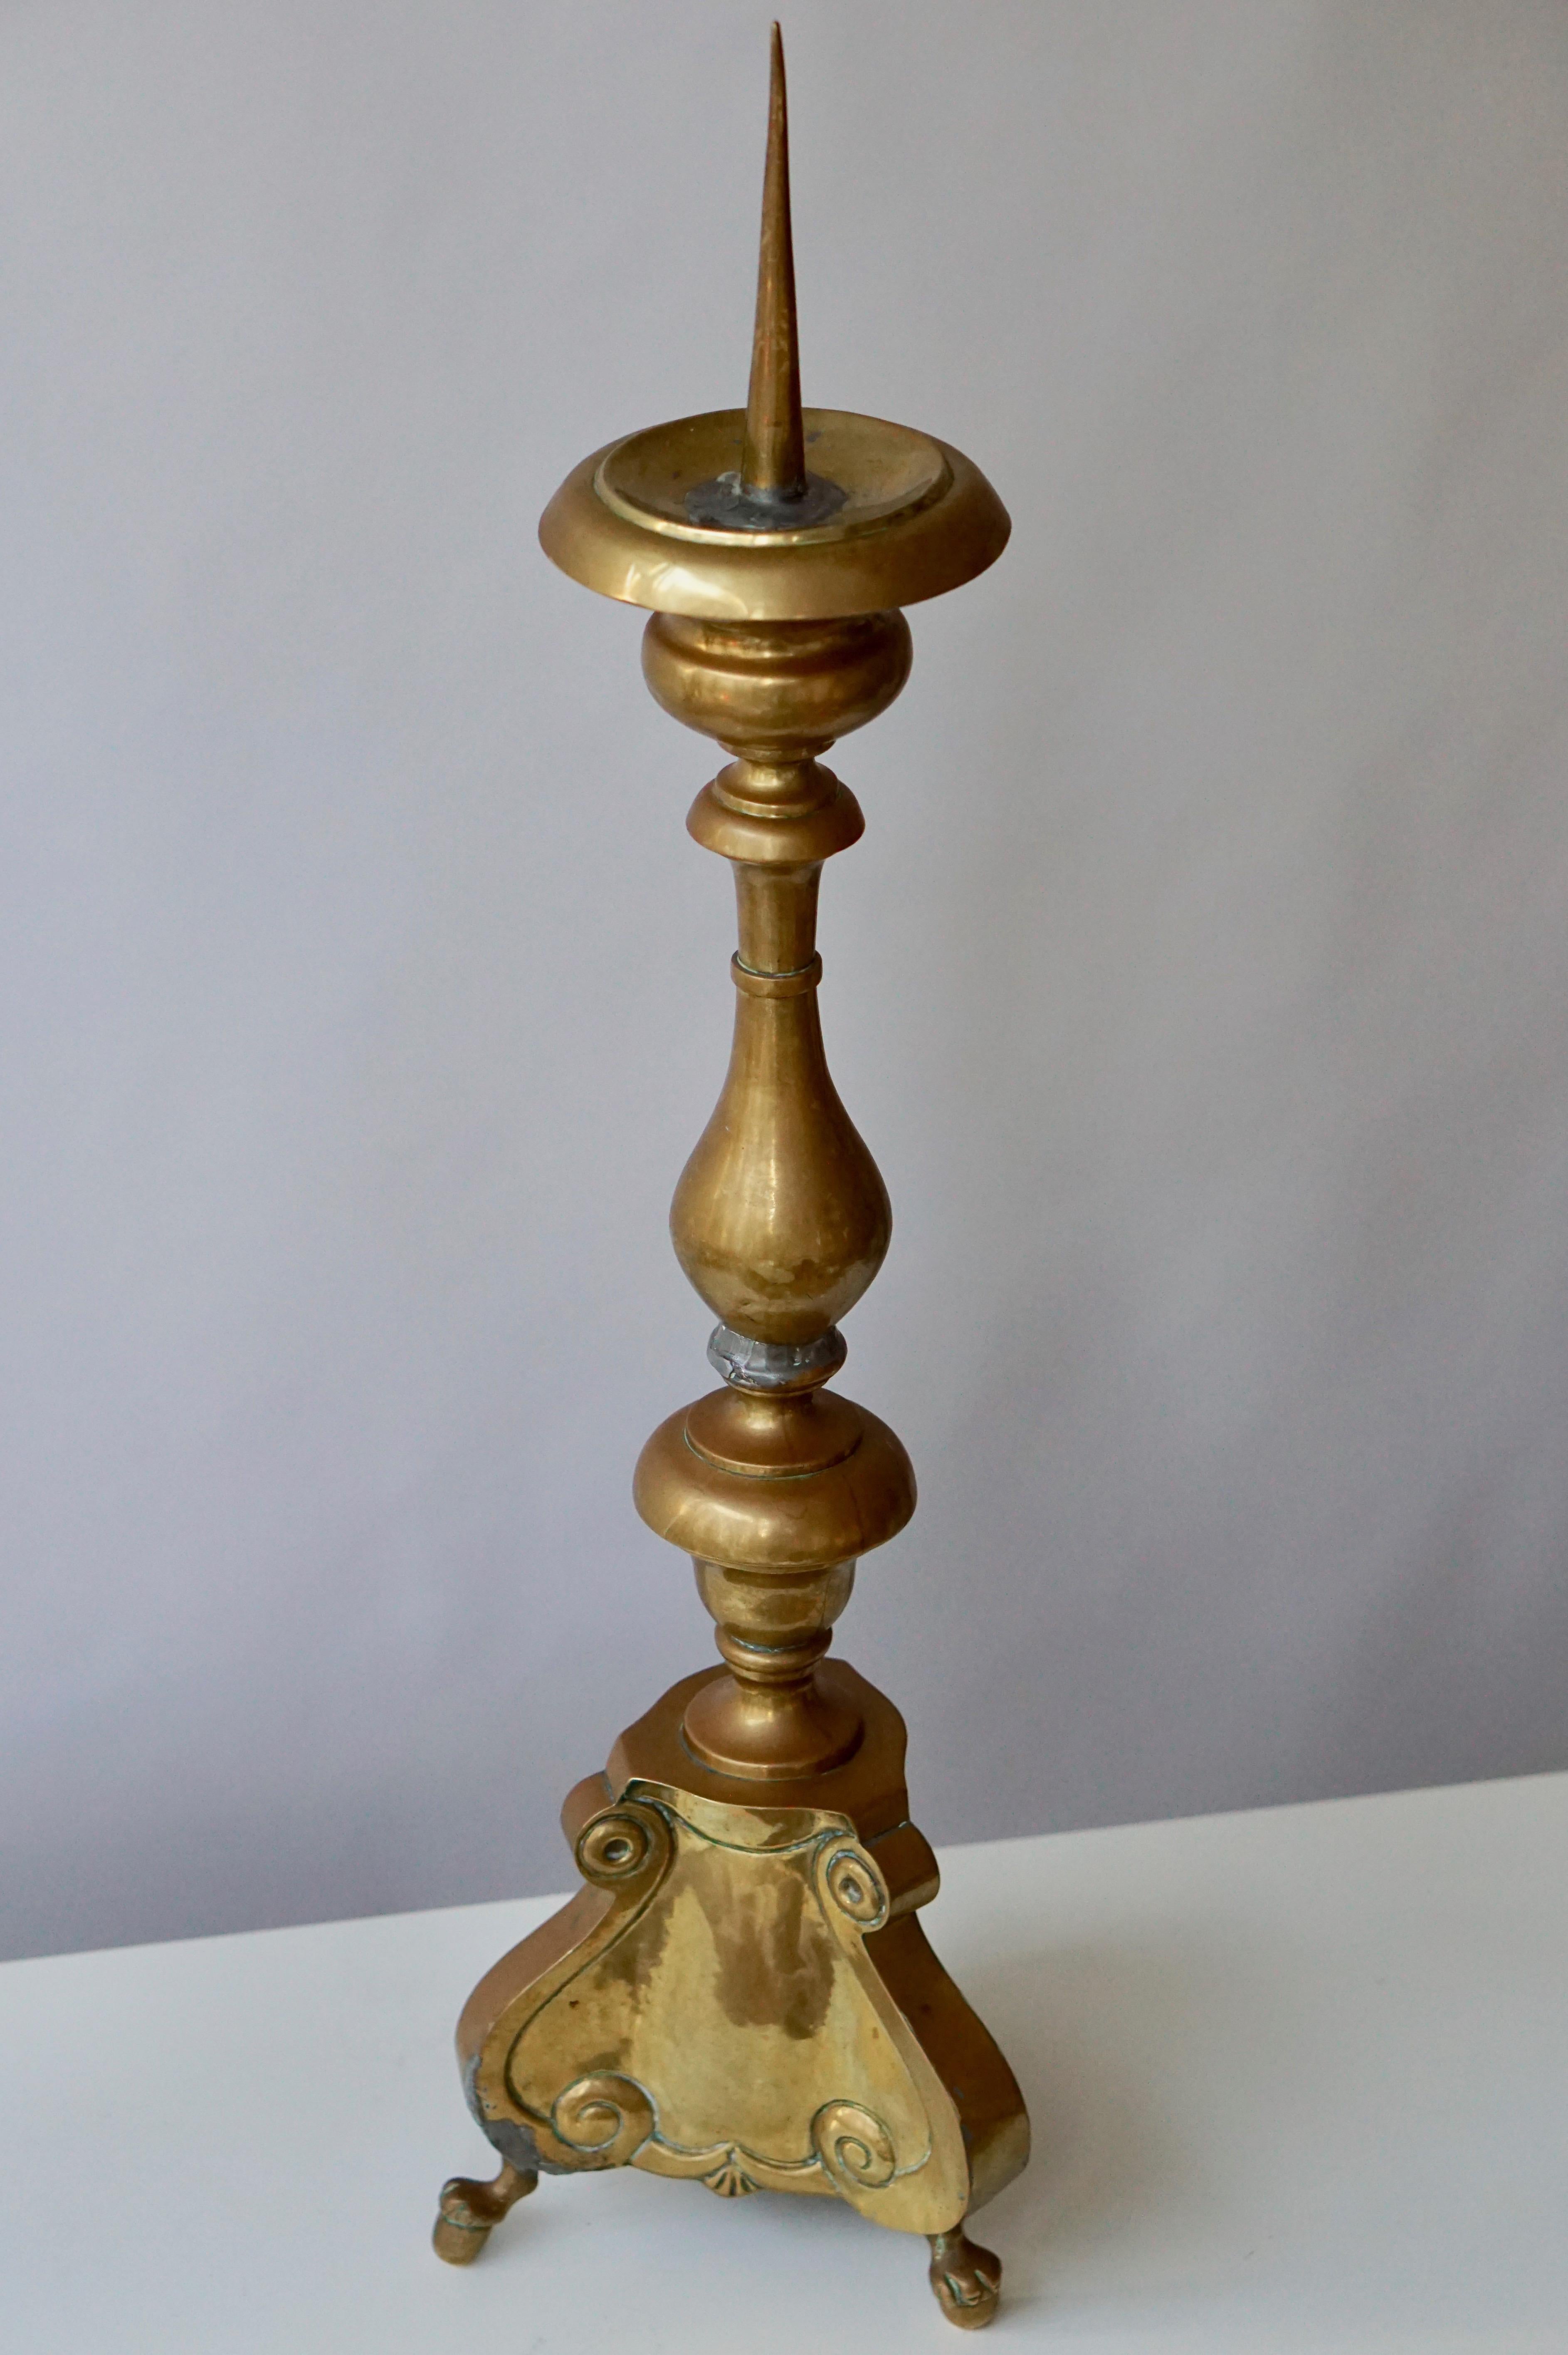 Italian Polished Brass Tall Torchere, Candlestick or Prickets, 19th Century For Sale